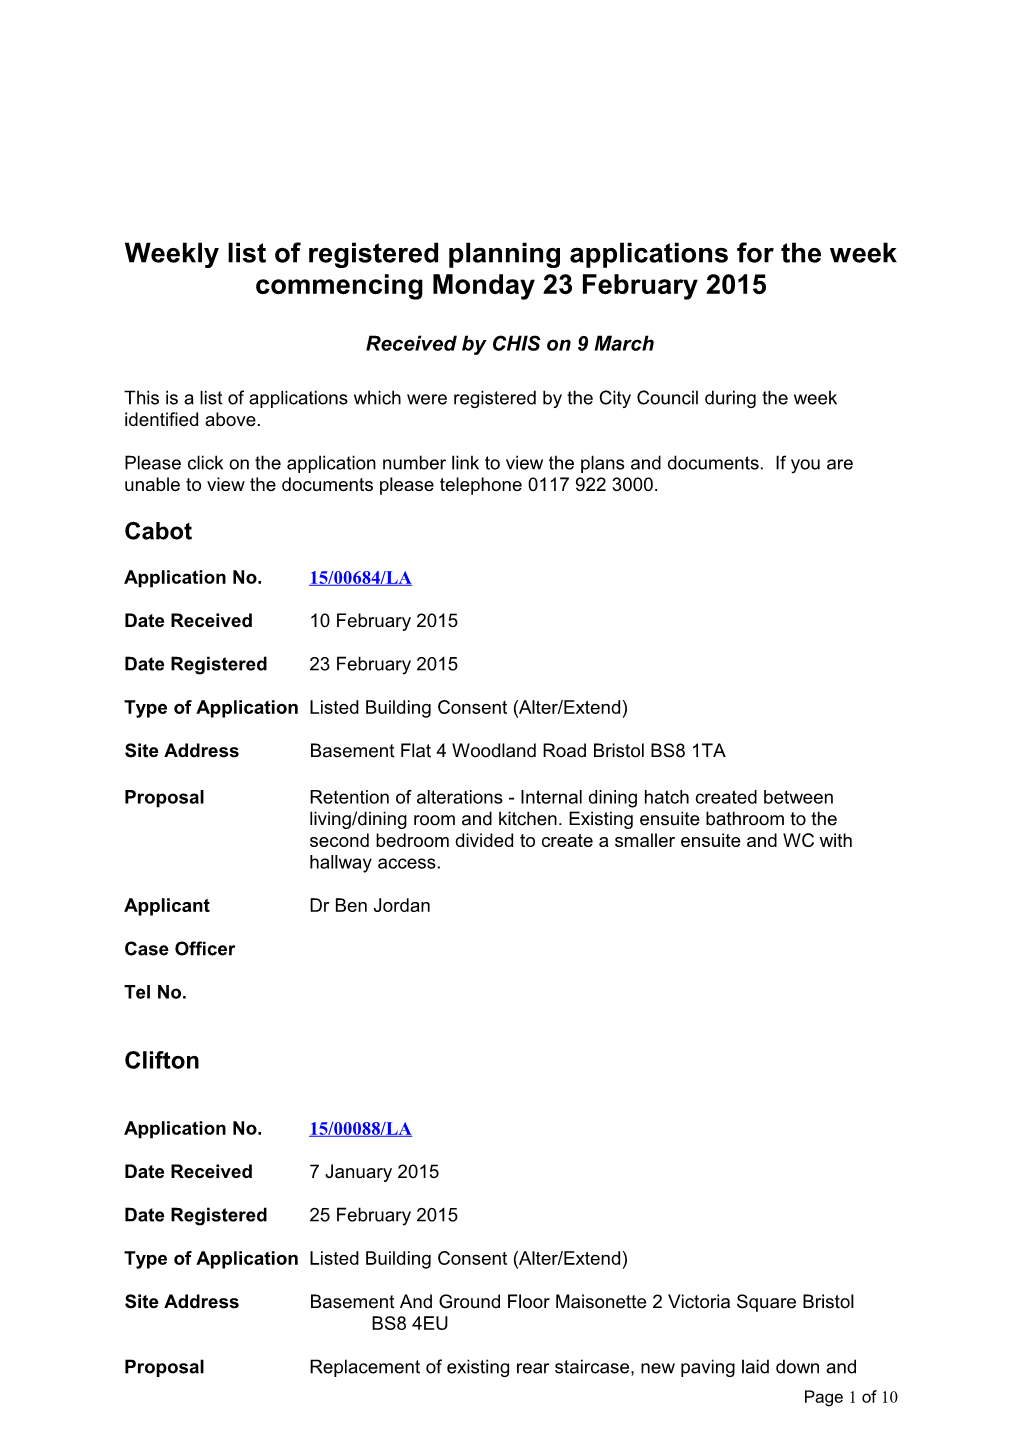 Weekly List of Registered Planning Applications for the Week Commencing Monday 23 February